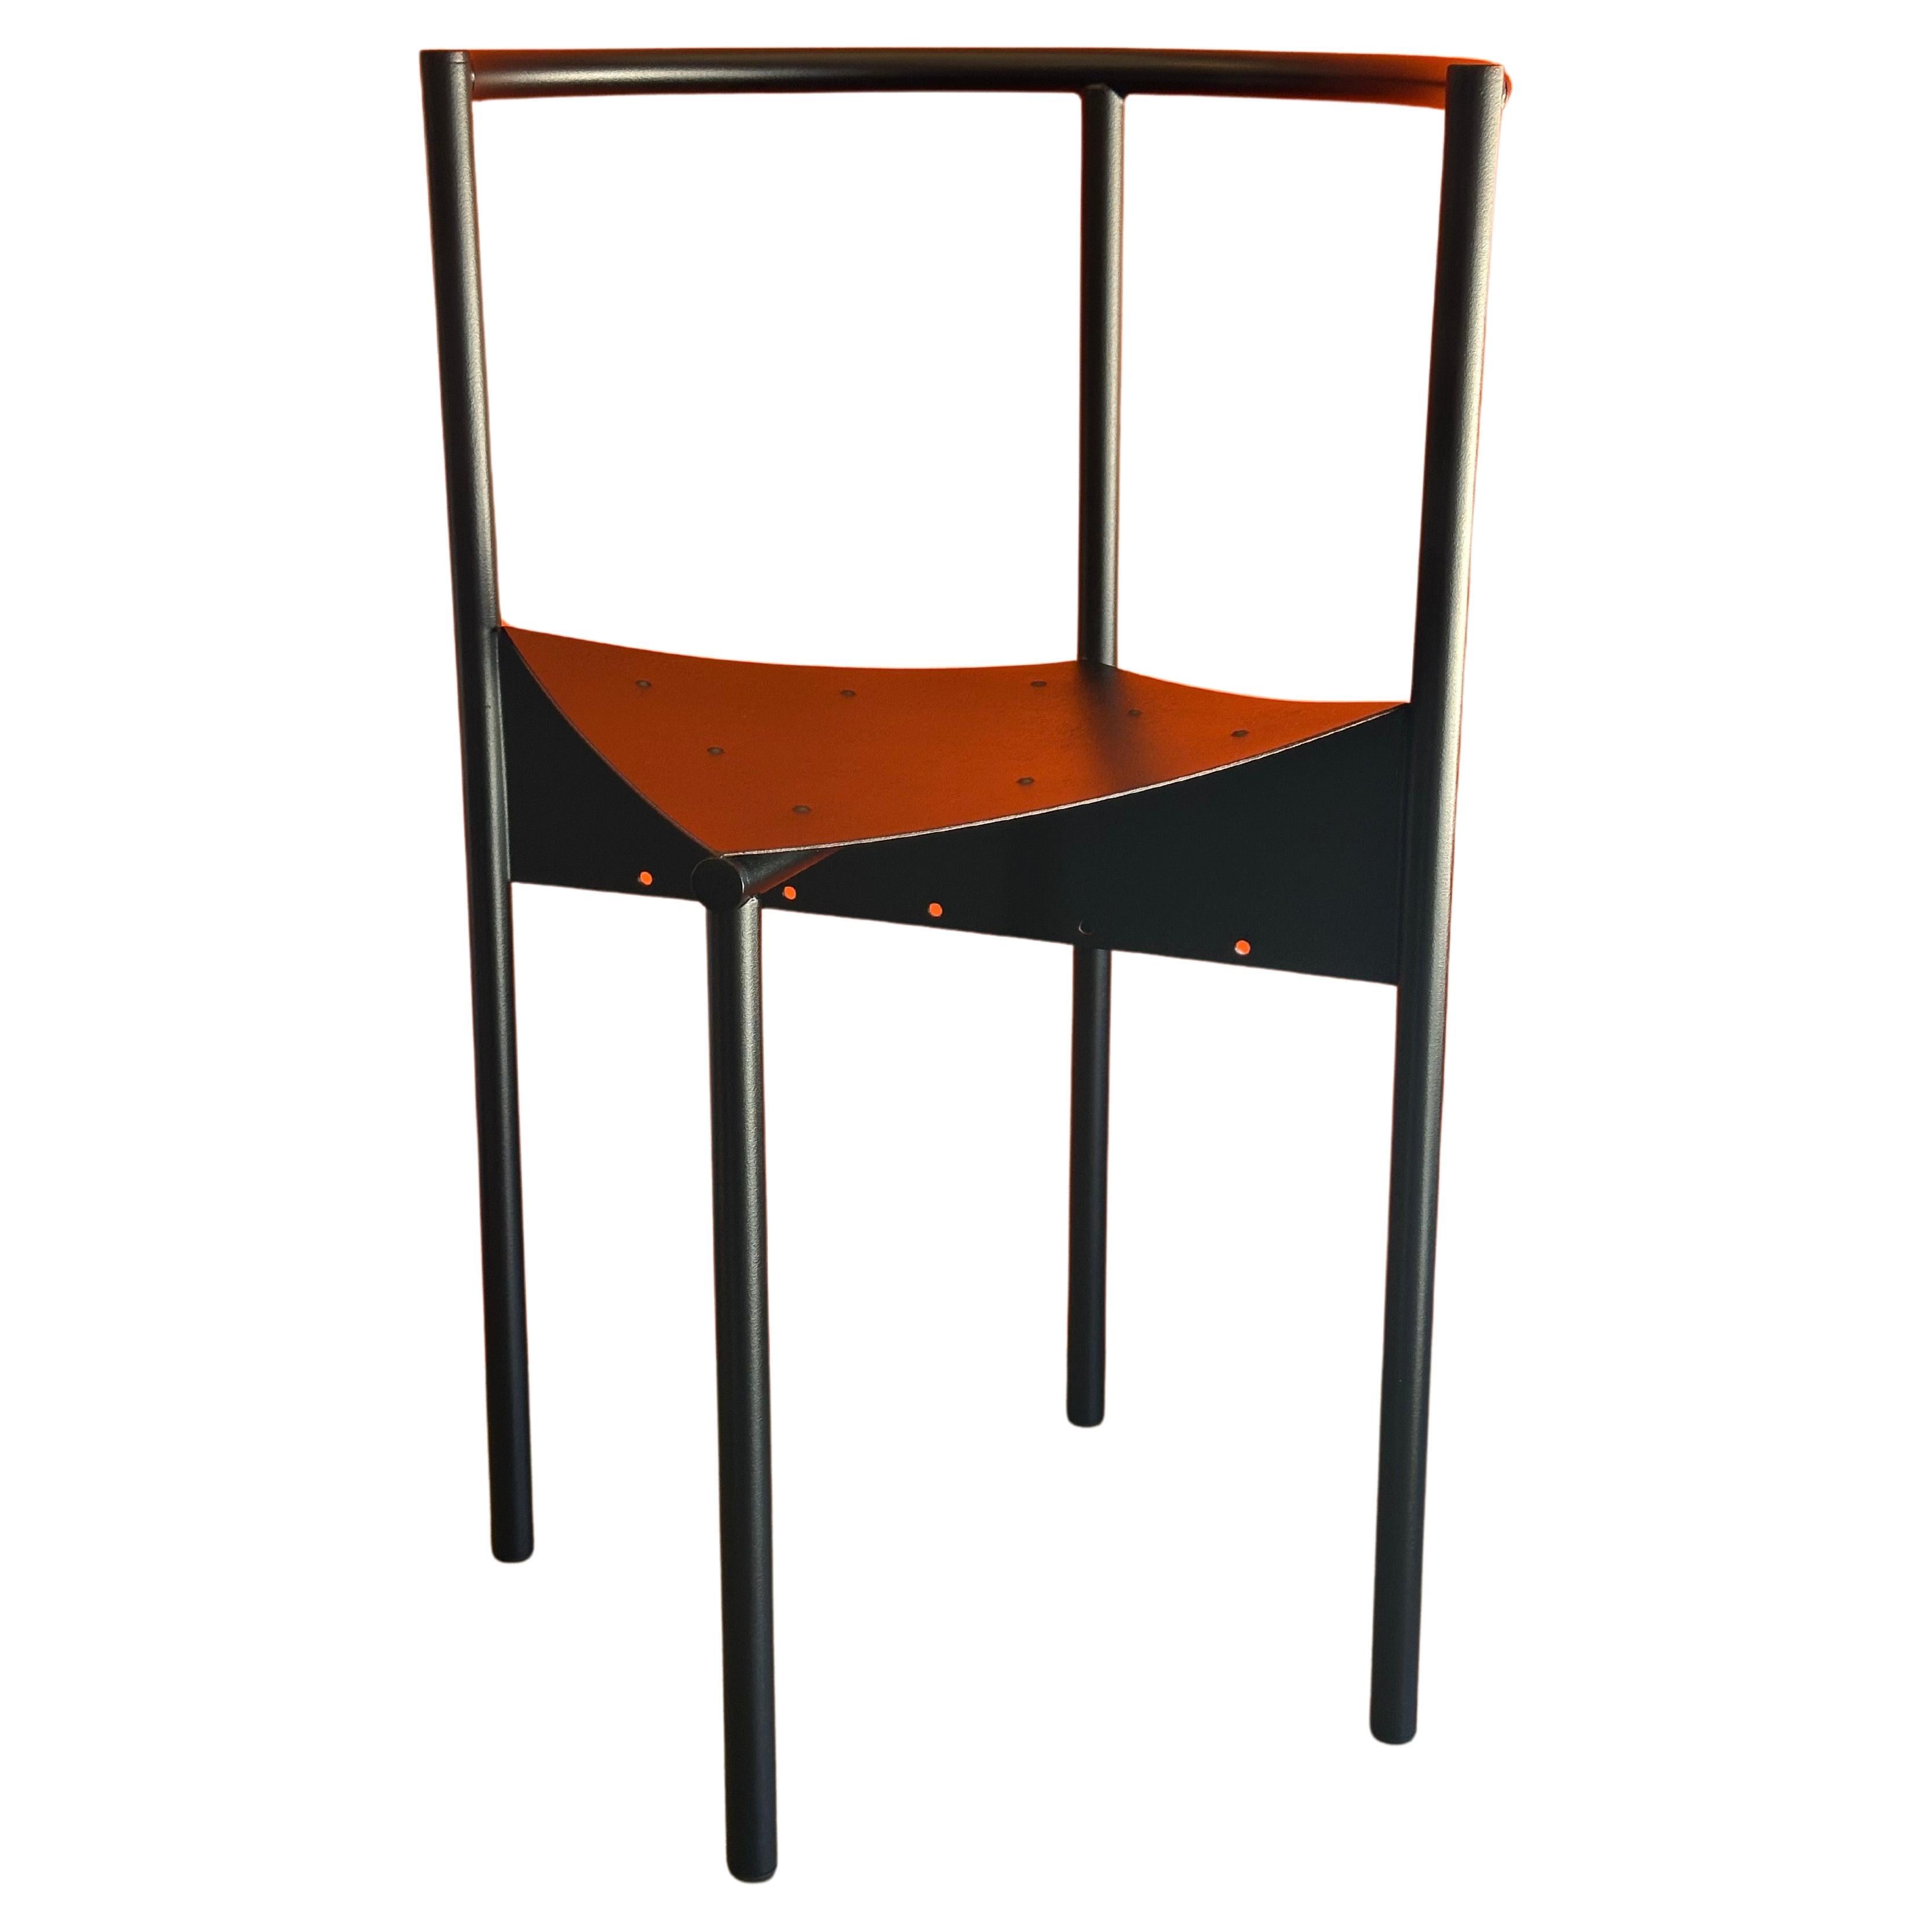 Black "Wendy Wright" Chair by Philippe Starck for Disform